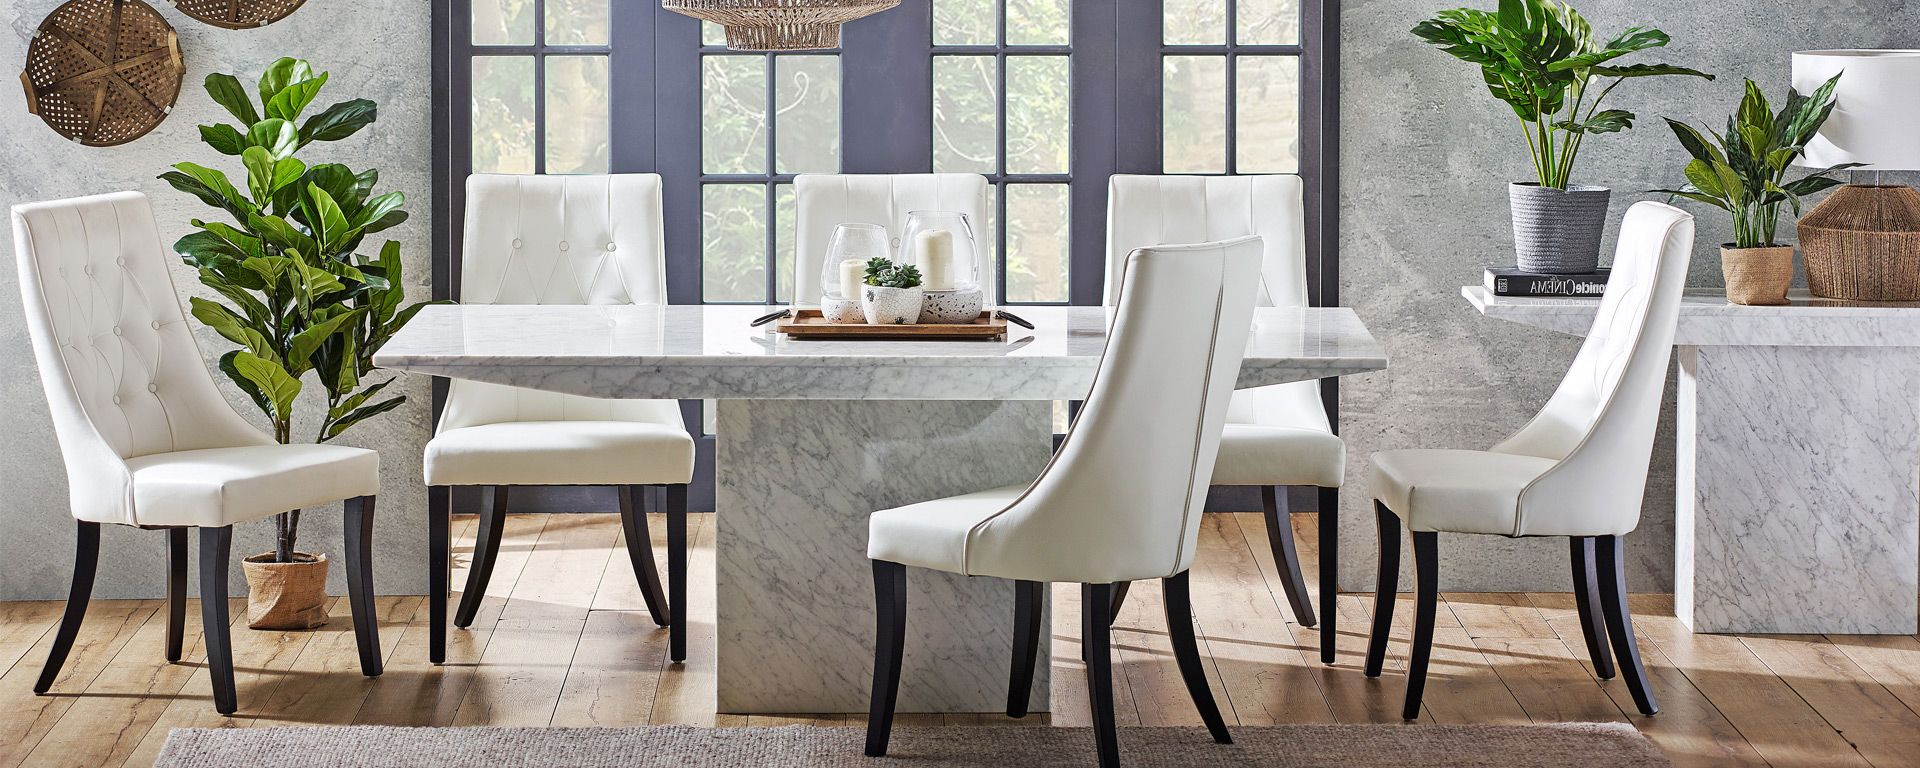 Medium Elegant Dining Tables Intended For Trendy Dining Room Goals: 5 Trending Concrete And Stone Dining (View 20 of 25)